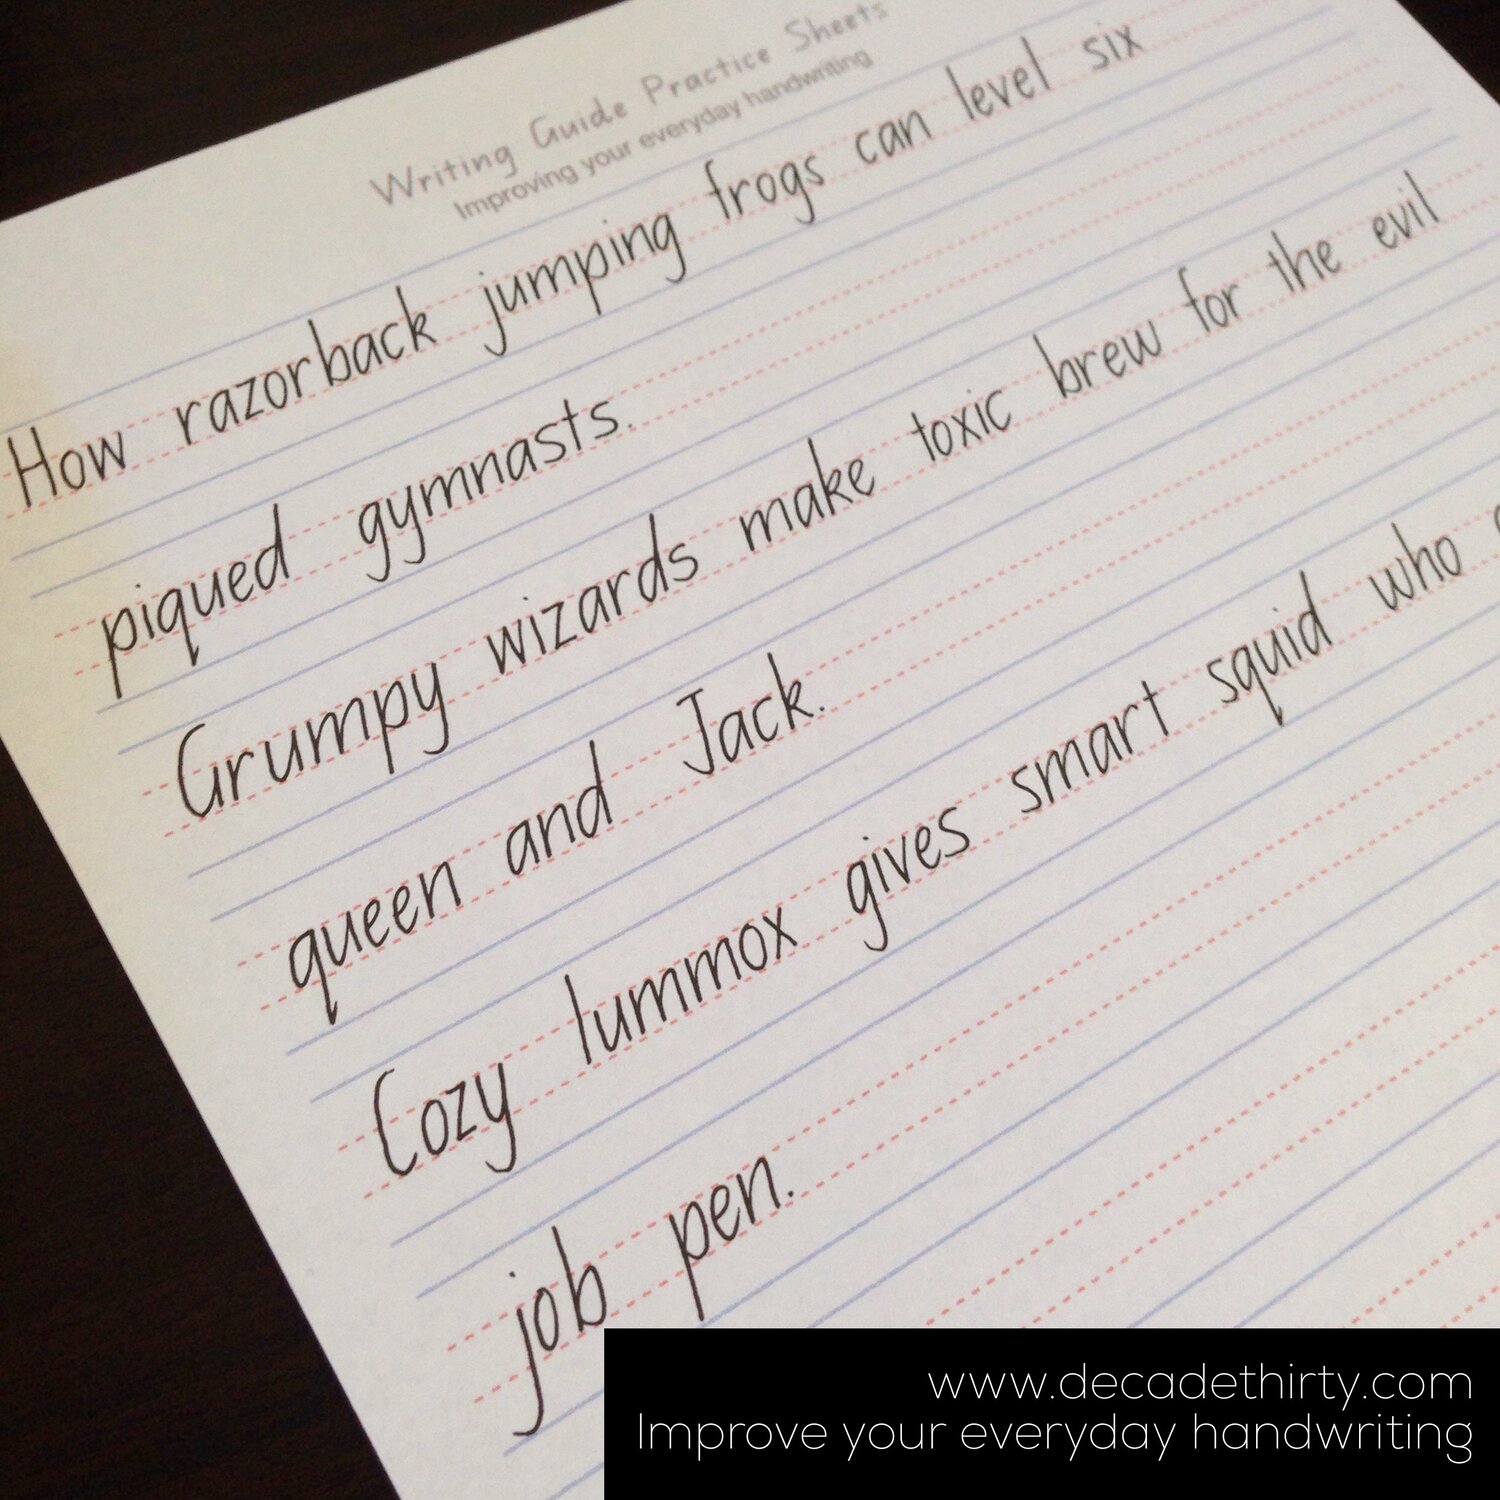 Improve your everyday handwriting... in sentences — DECADE THIRTY